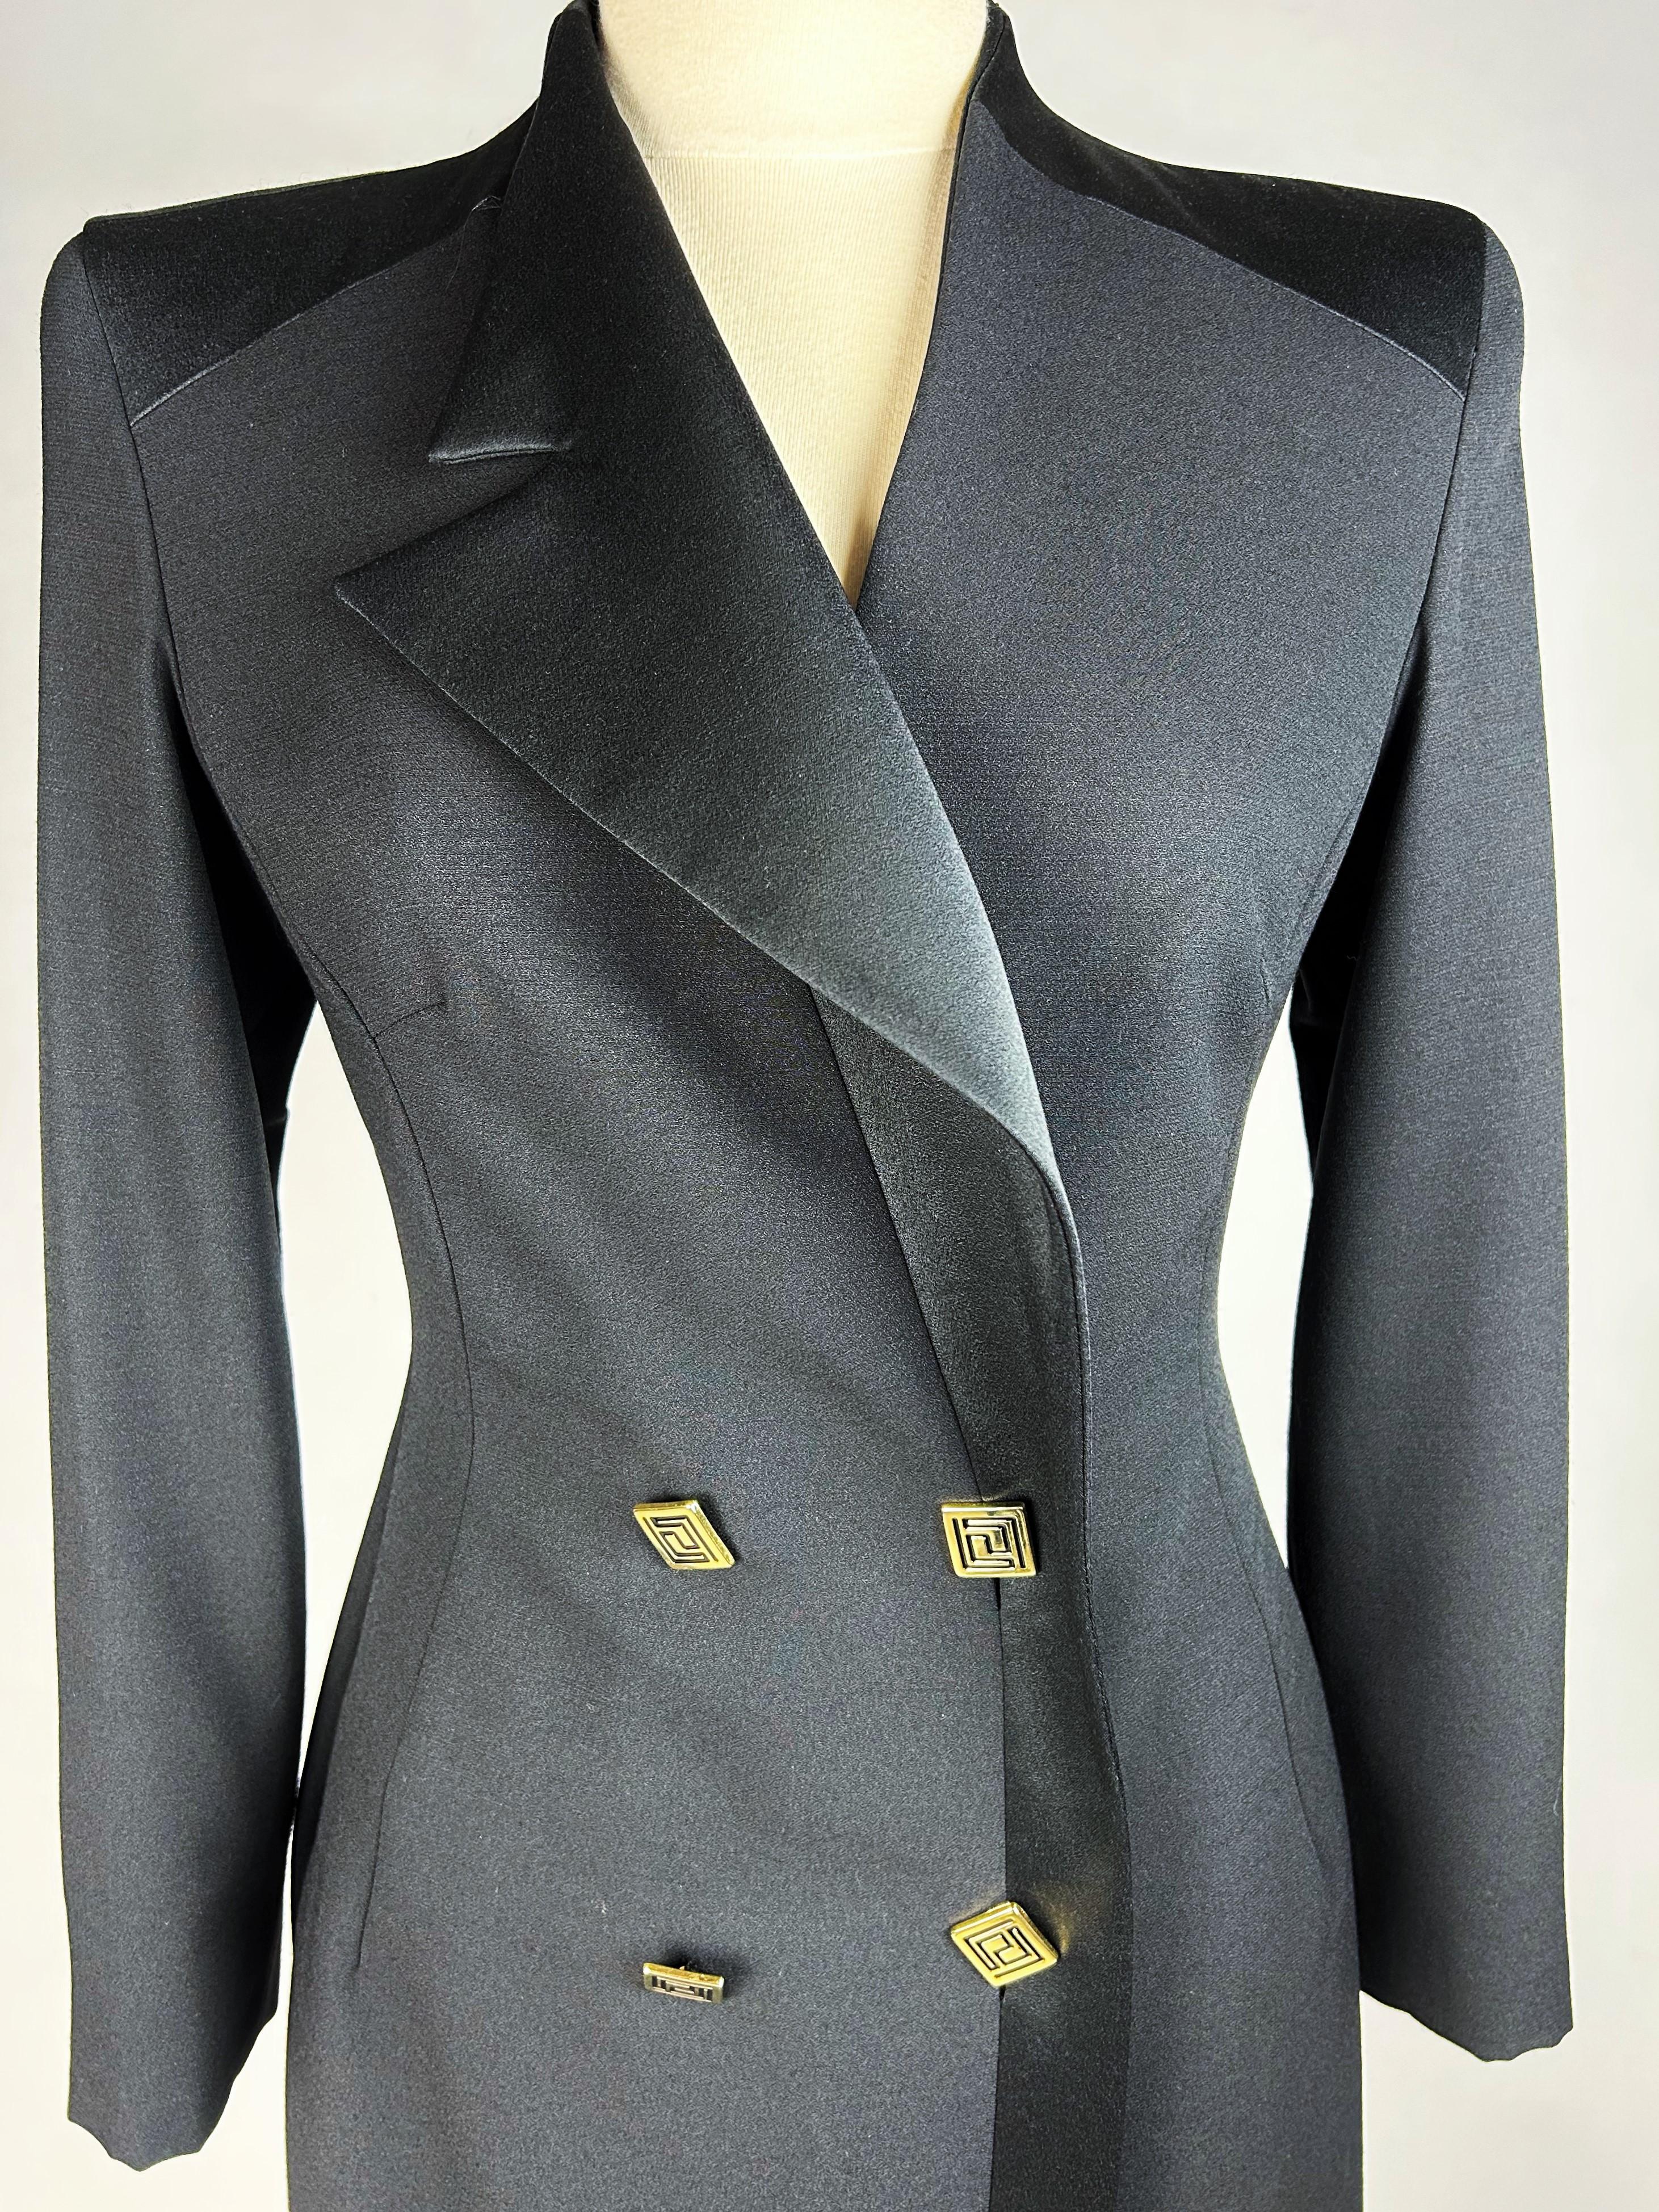 Circa 2000

Italy

Elegant black powder grain dinner jacket Tuxedo evening coat by Versace Classic V2 dating from the late 1990s. Fitted with darts that hug the bust and double-breasted buttoning with a large asymmetrical collar lapel in black